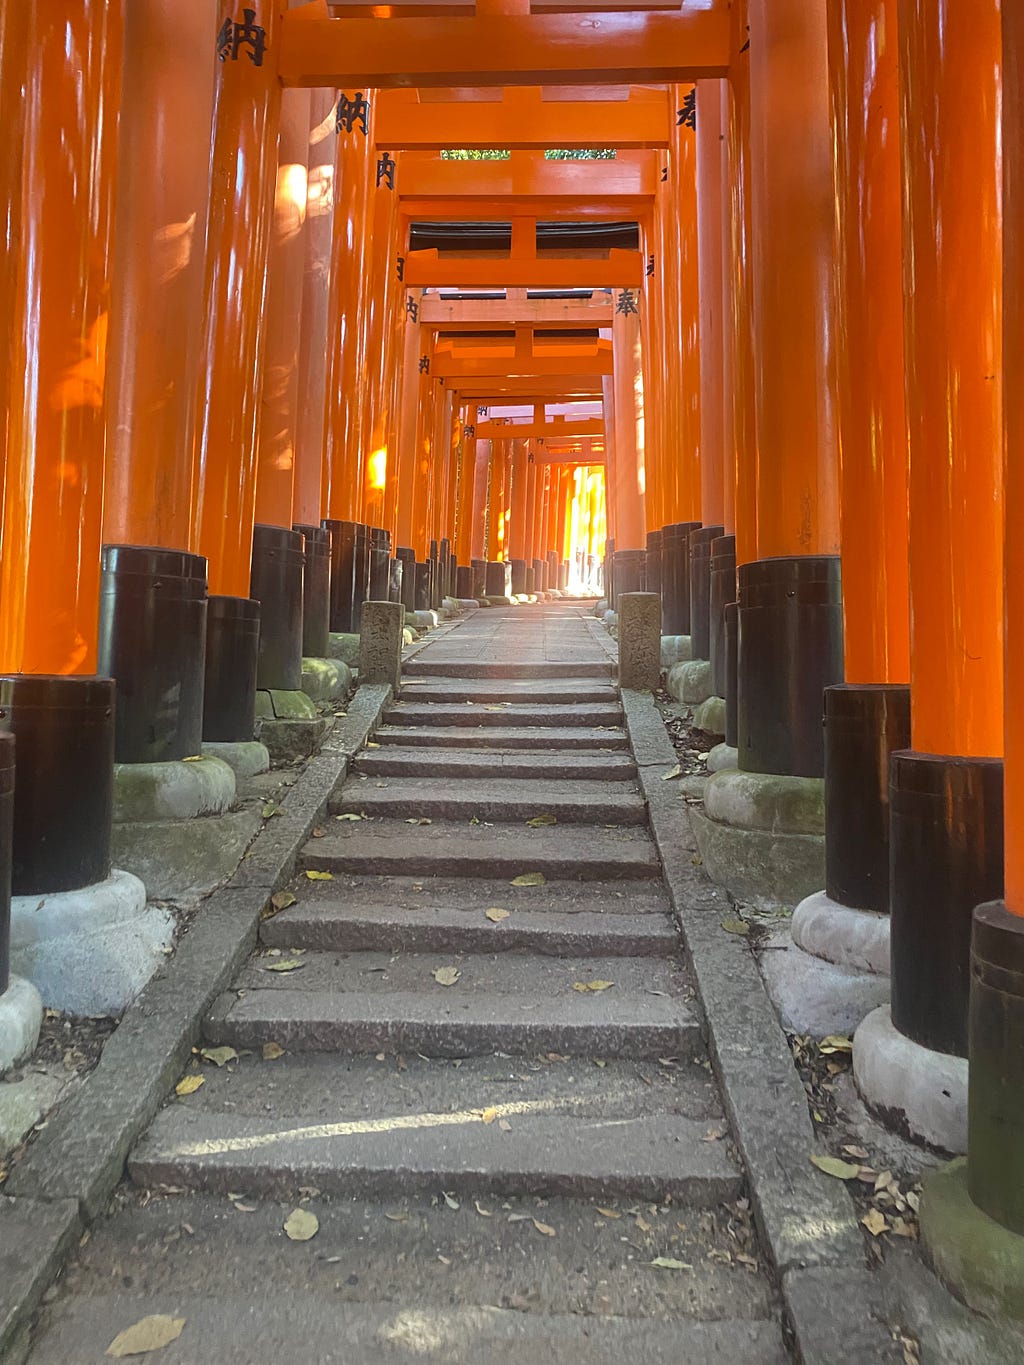 There are many shrine’s gate, Torii.